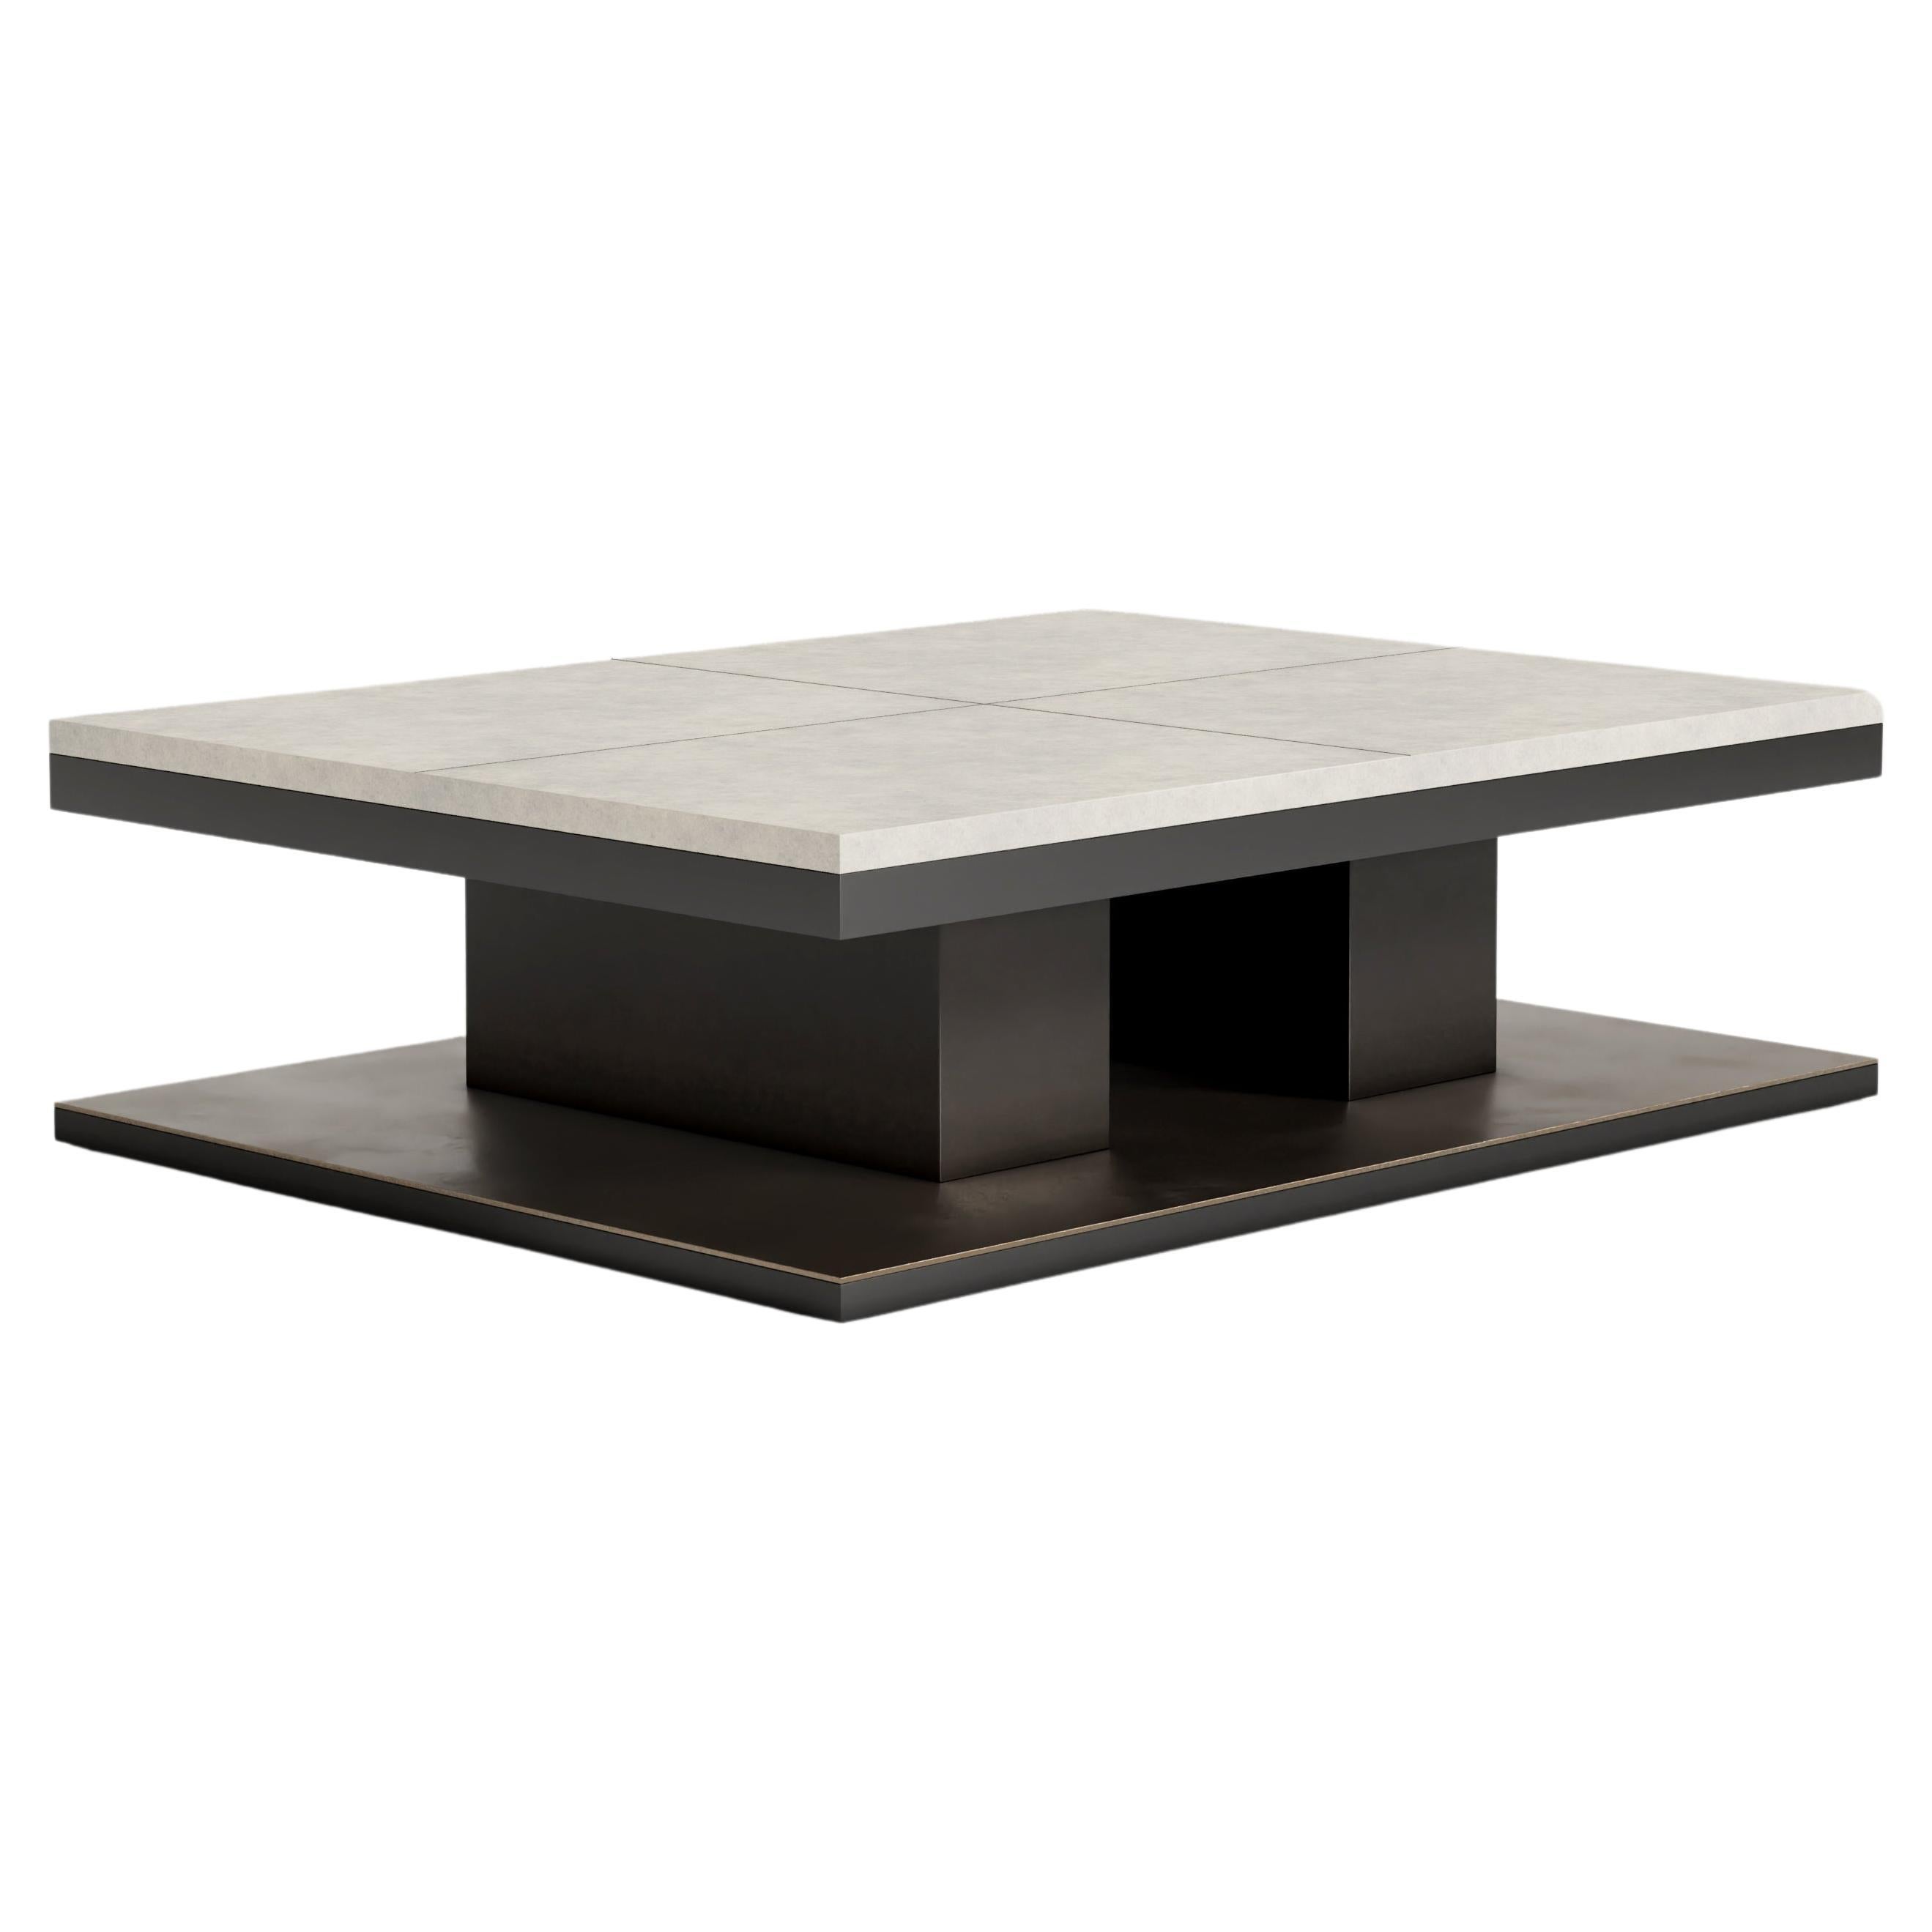 Rec Coffee Table in Goat Skin and Matte Black Lacquer by Palena Furniture